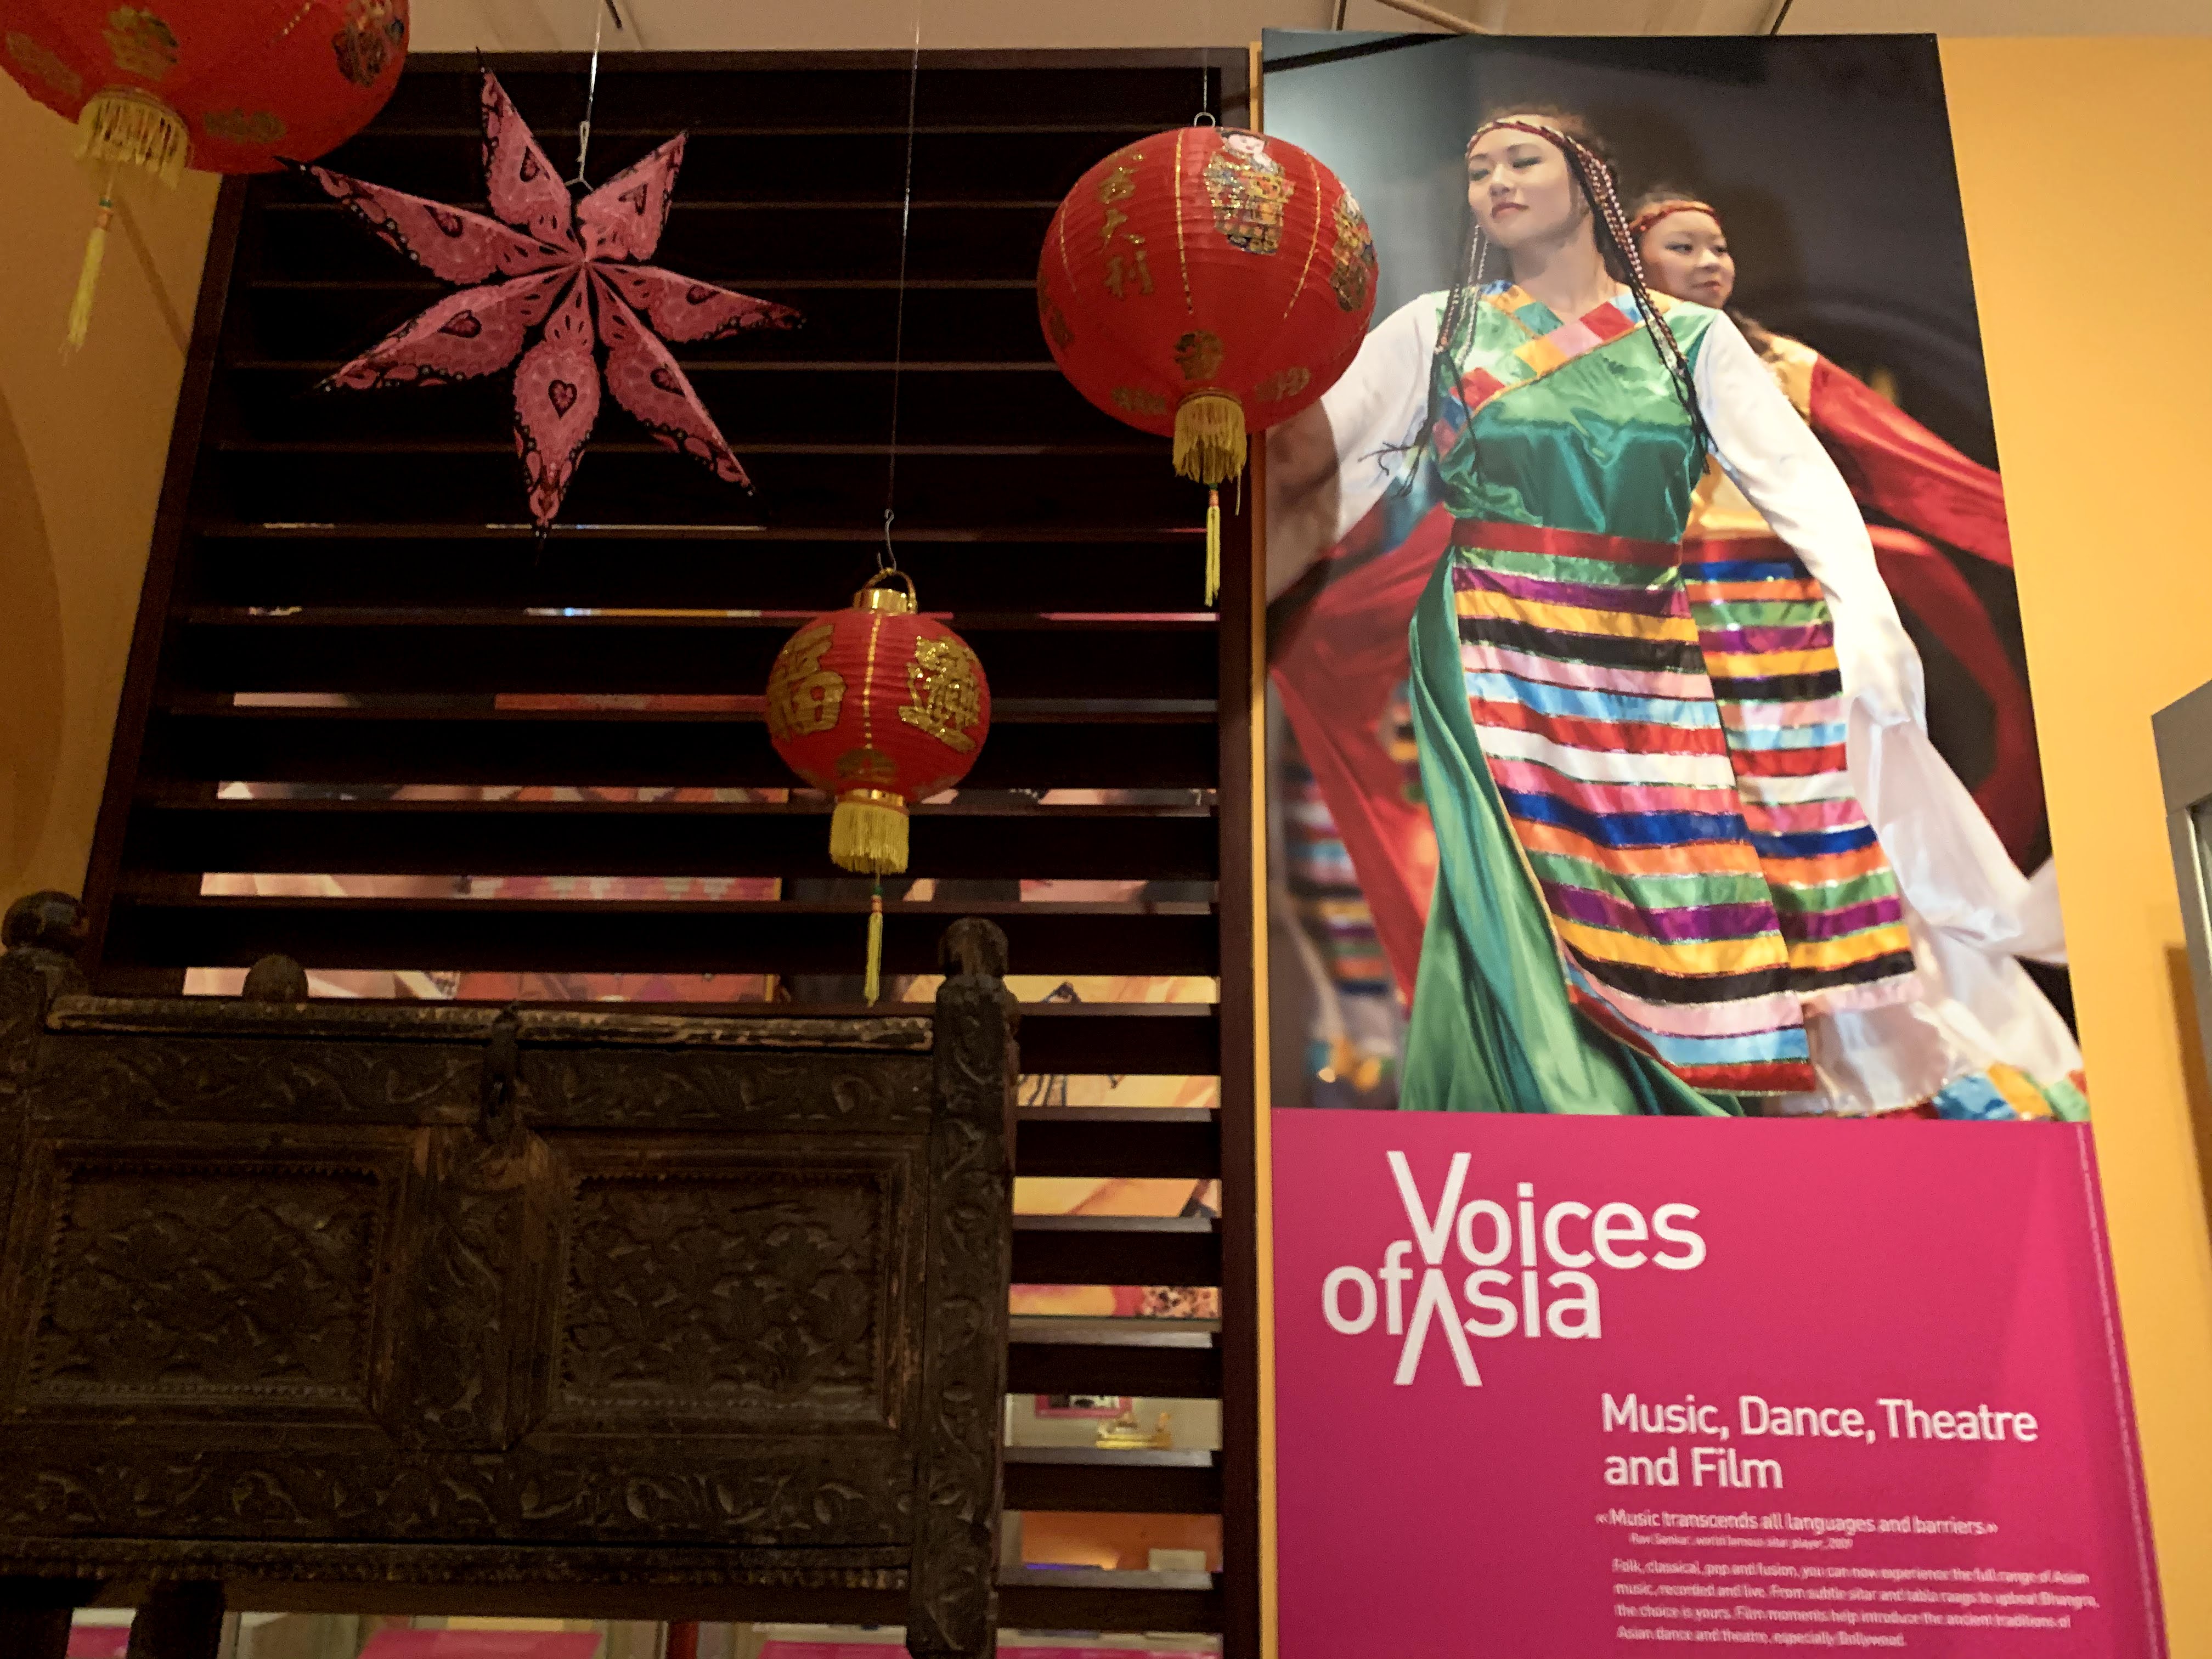 leeds city museum galleries and museums city centre yorkshire families voices of asia